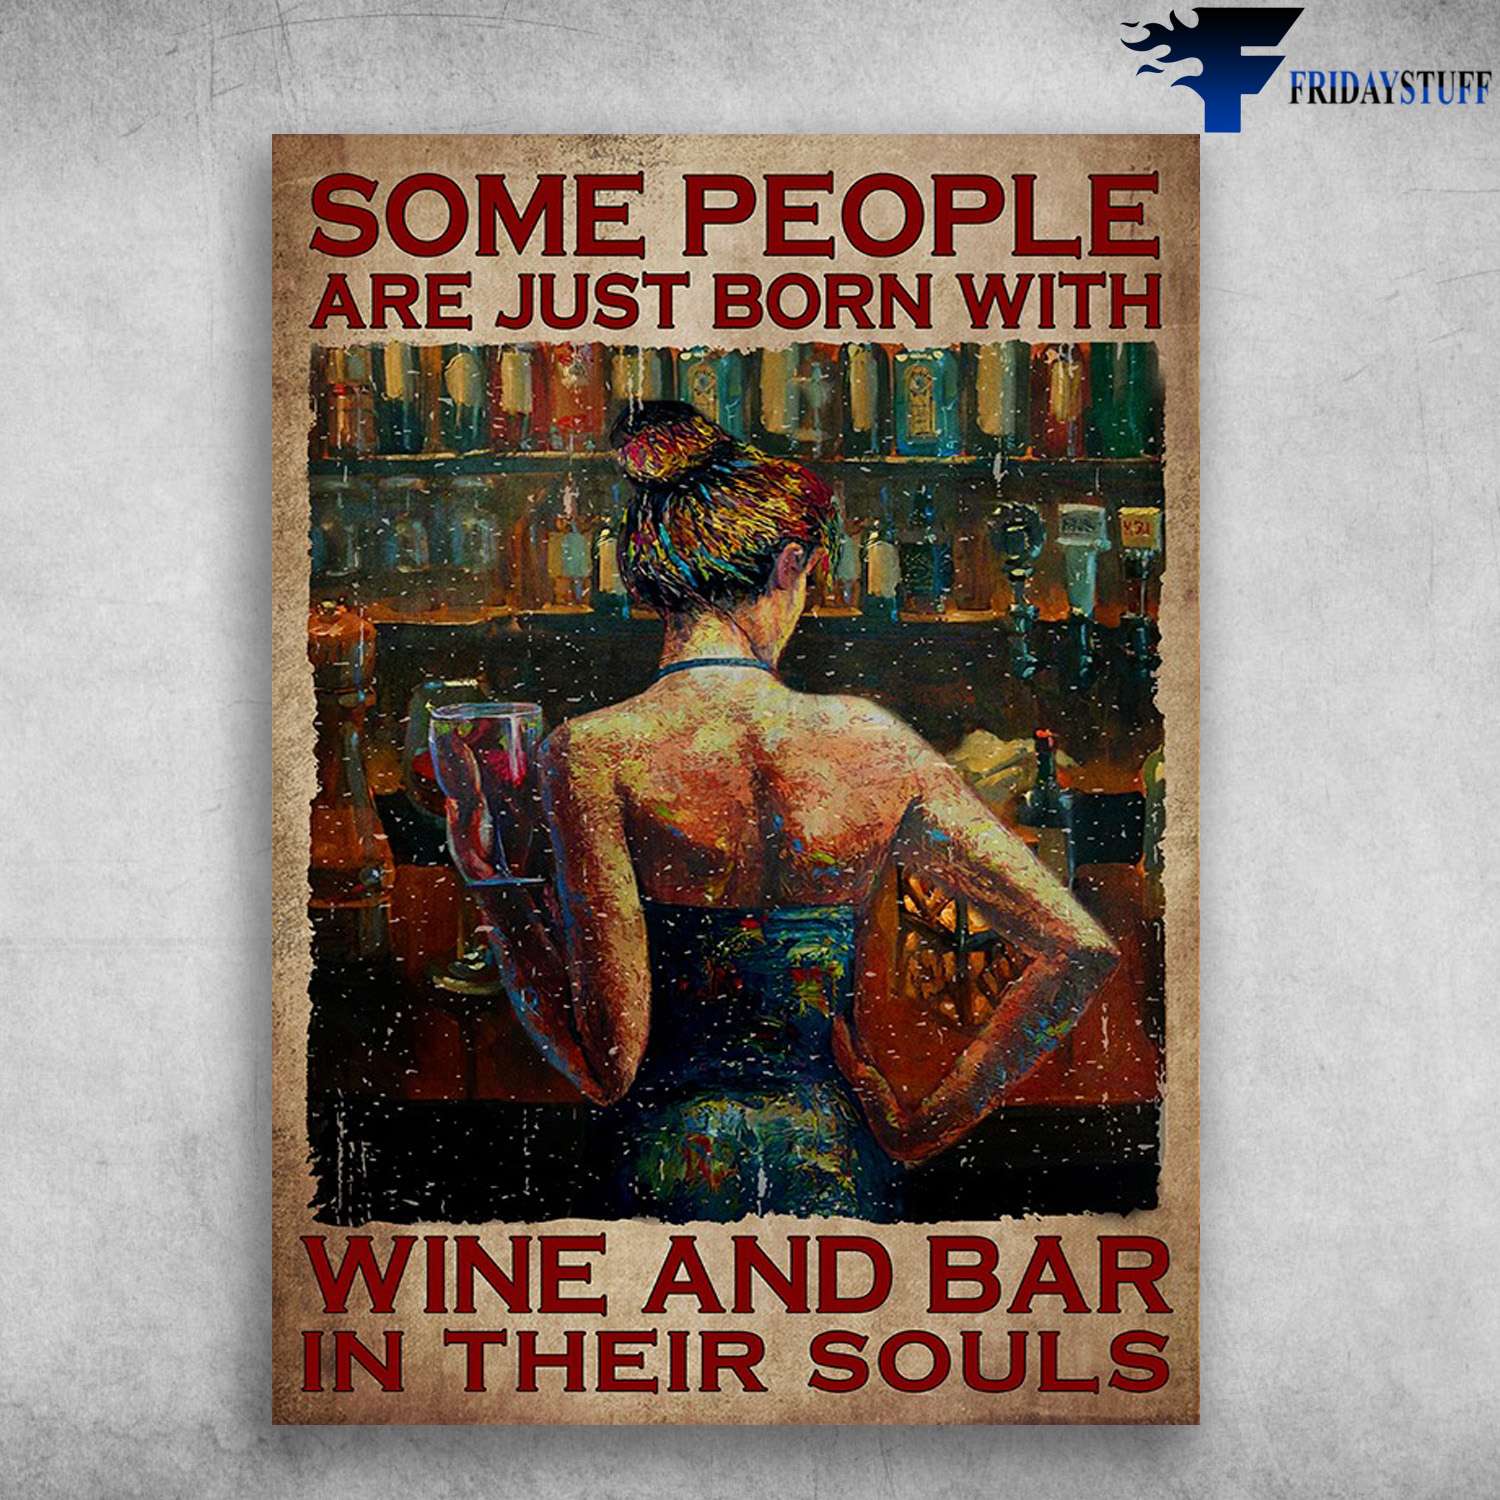 Drinking Girl - Some People Are Just Born With, Wine And Bar In Their Souls